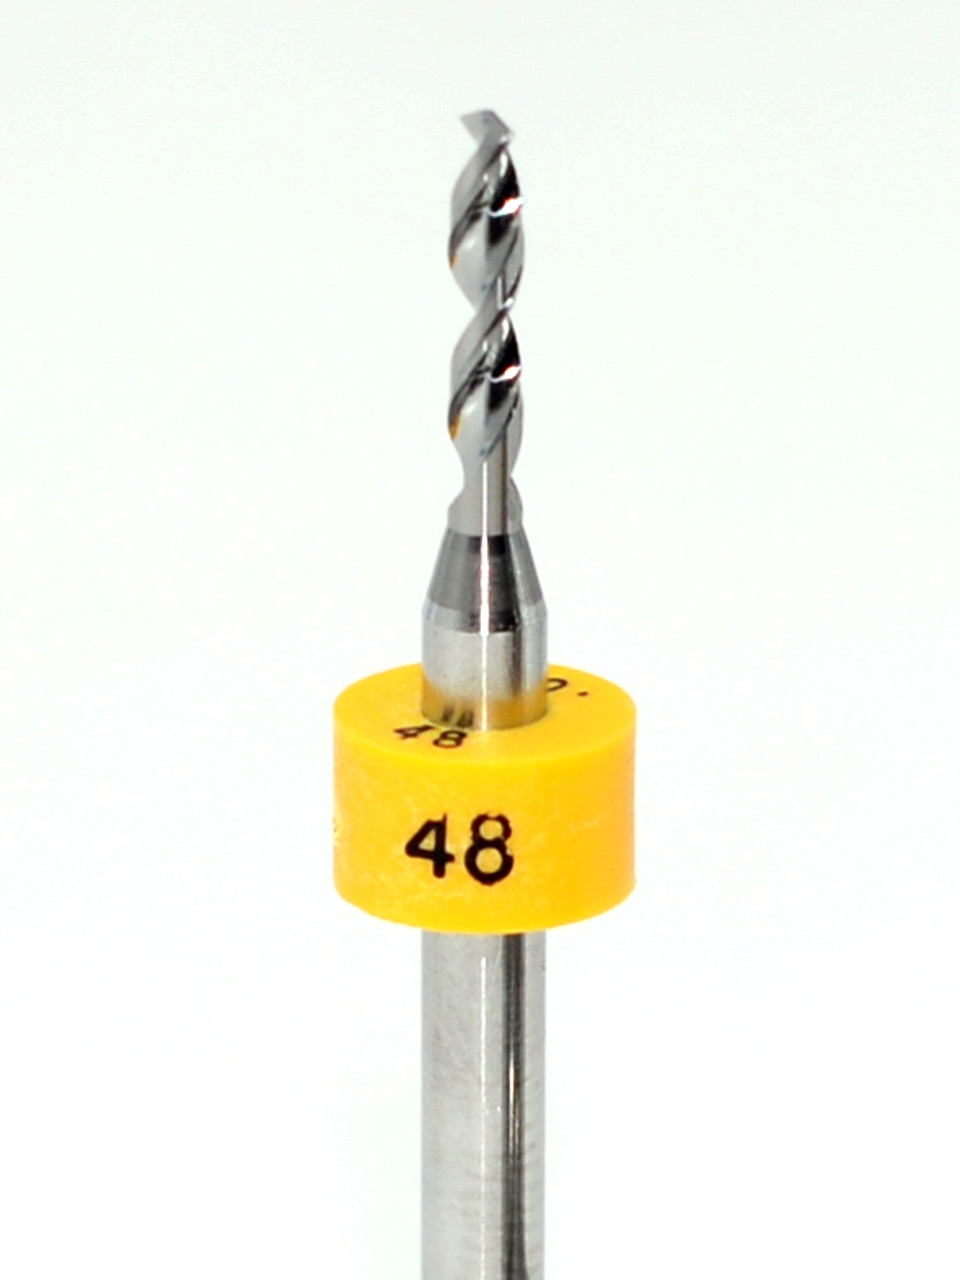 Drill bit Size: 1.93mm  also #48 

 Flute length: sizes .50 to .65mm 8.90mm, sizes .70 to 2.50mm 10.50mm

Drill Point 135Â°, Shank .125â€ / 3.18mm,Overall length 38mm /1.50â€

All bits have plastic size rings, Material Micro-Grain Carbide Grade ISO K20 / K30

Drill bits Self centering on flat surface Other surfaces use center drill first